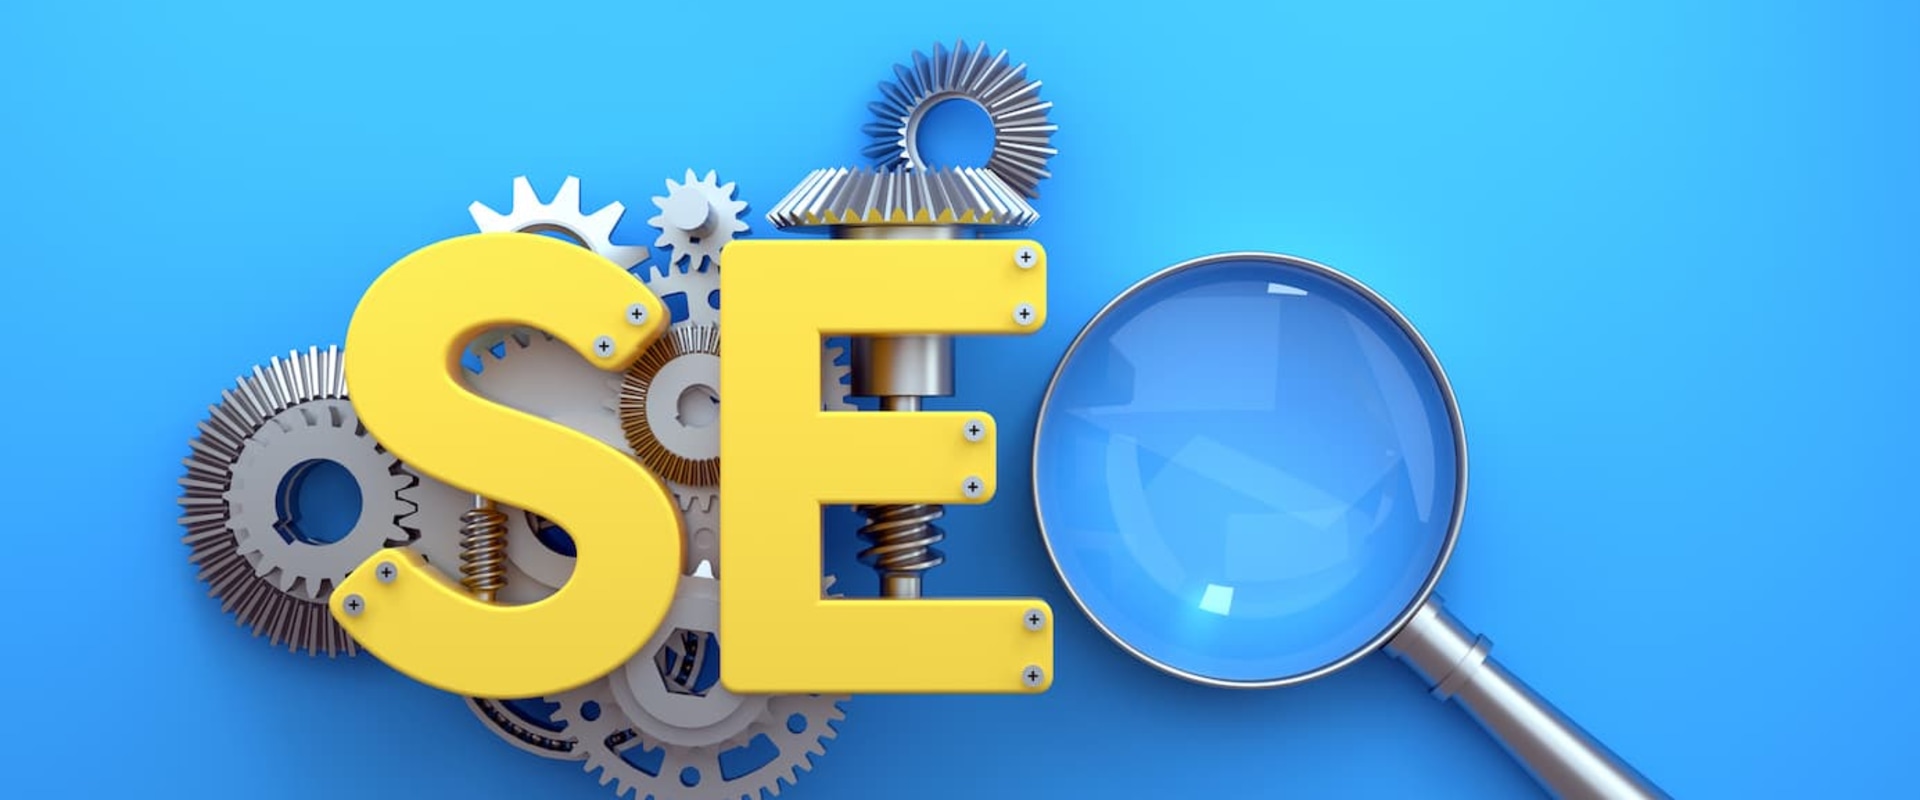 How to Optimize Your Search Engine Results